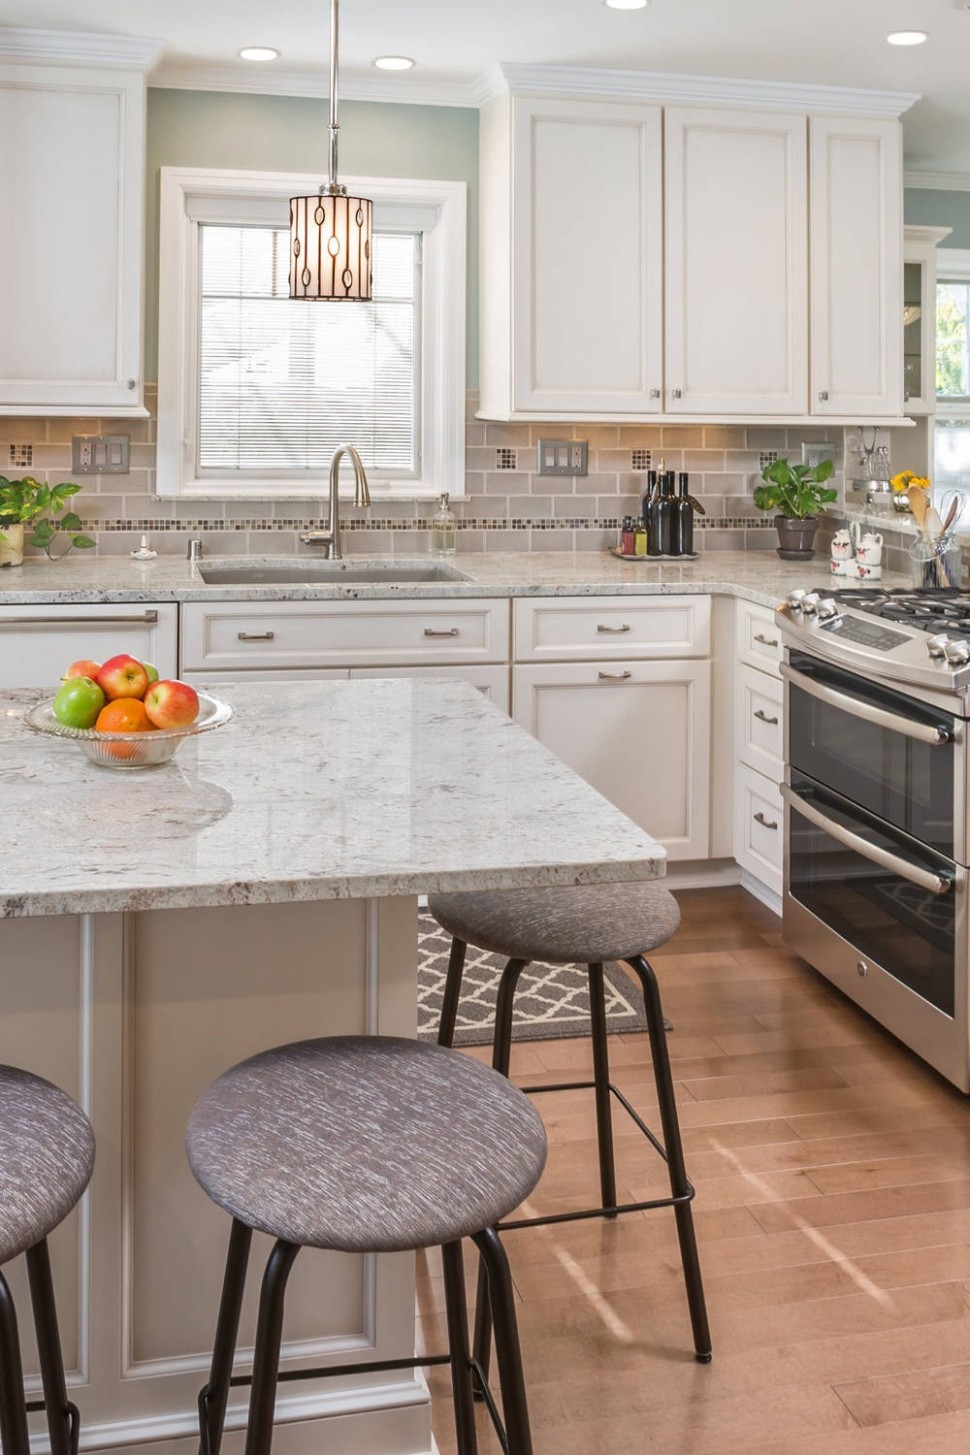 5+ Best White Granite With White Cabinets  CountertopsNews - what color granite looks best with white cabinets?